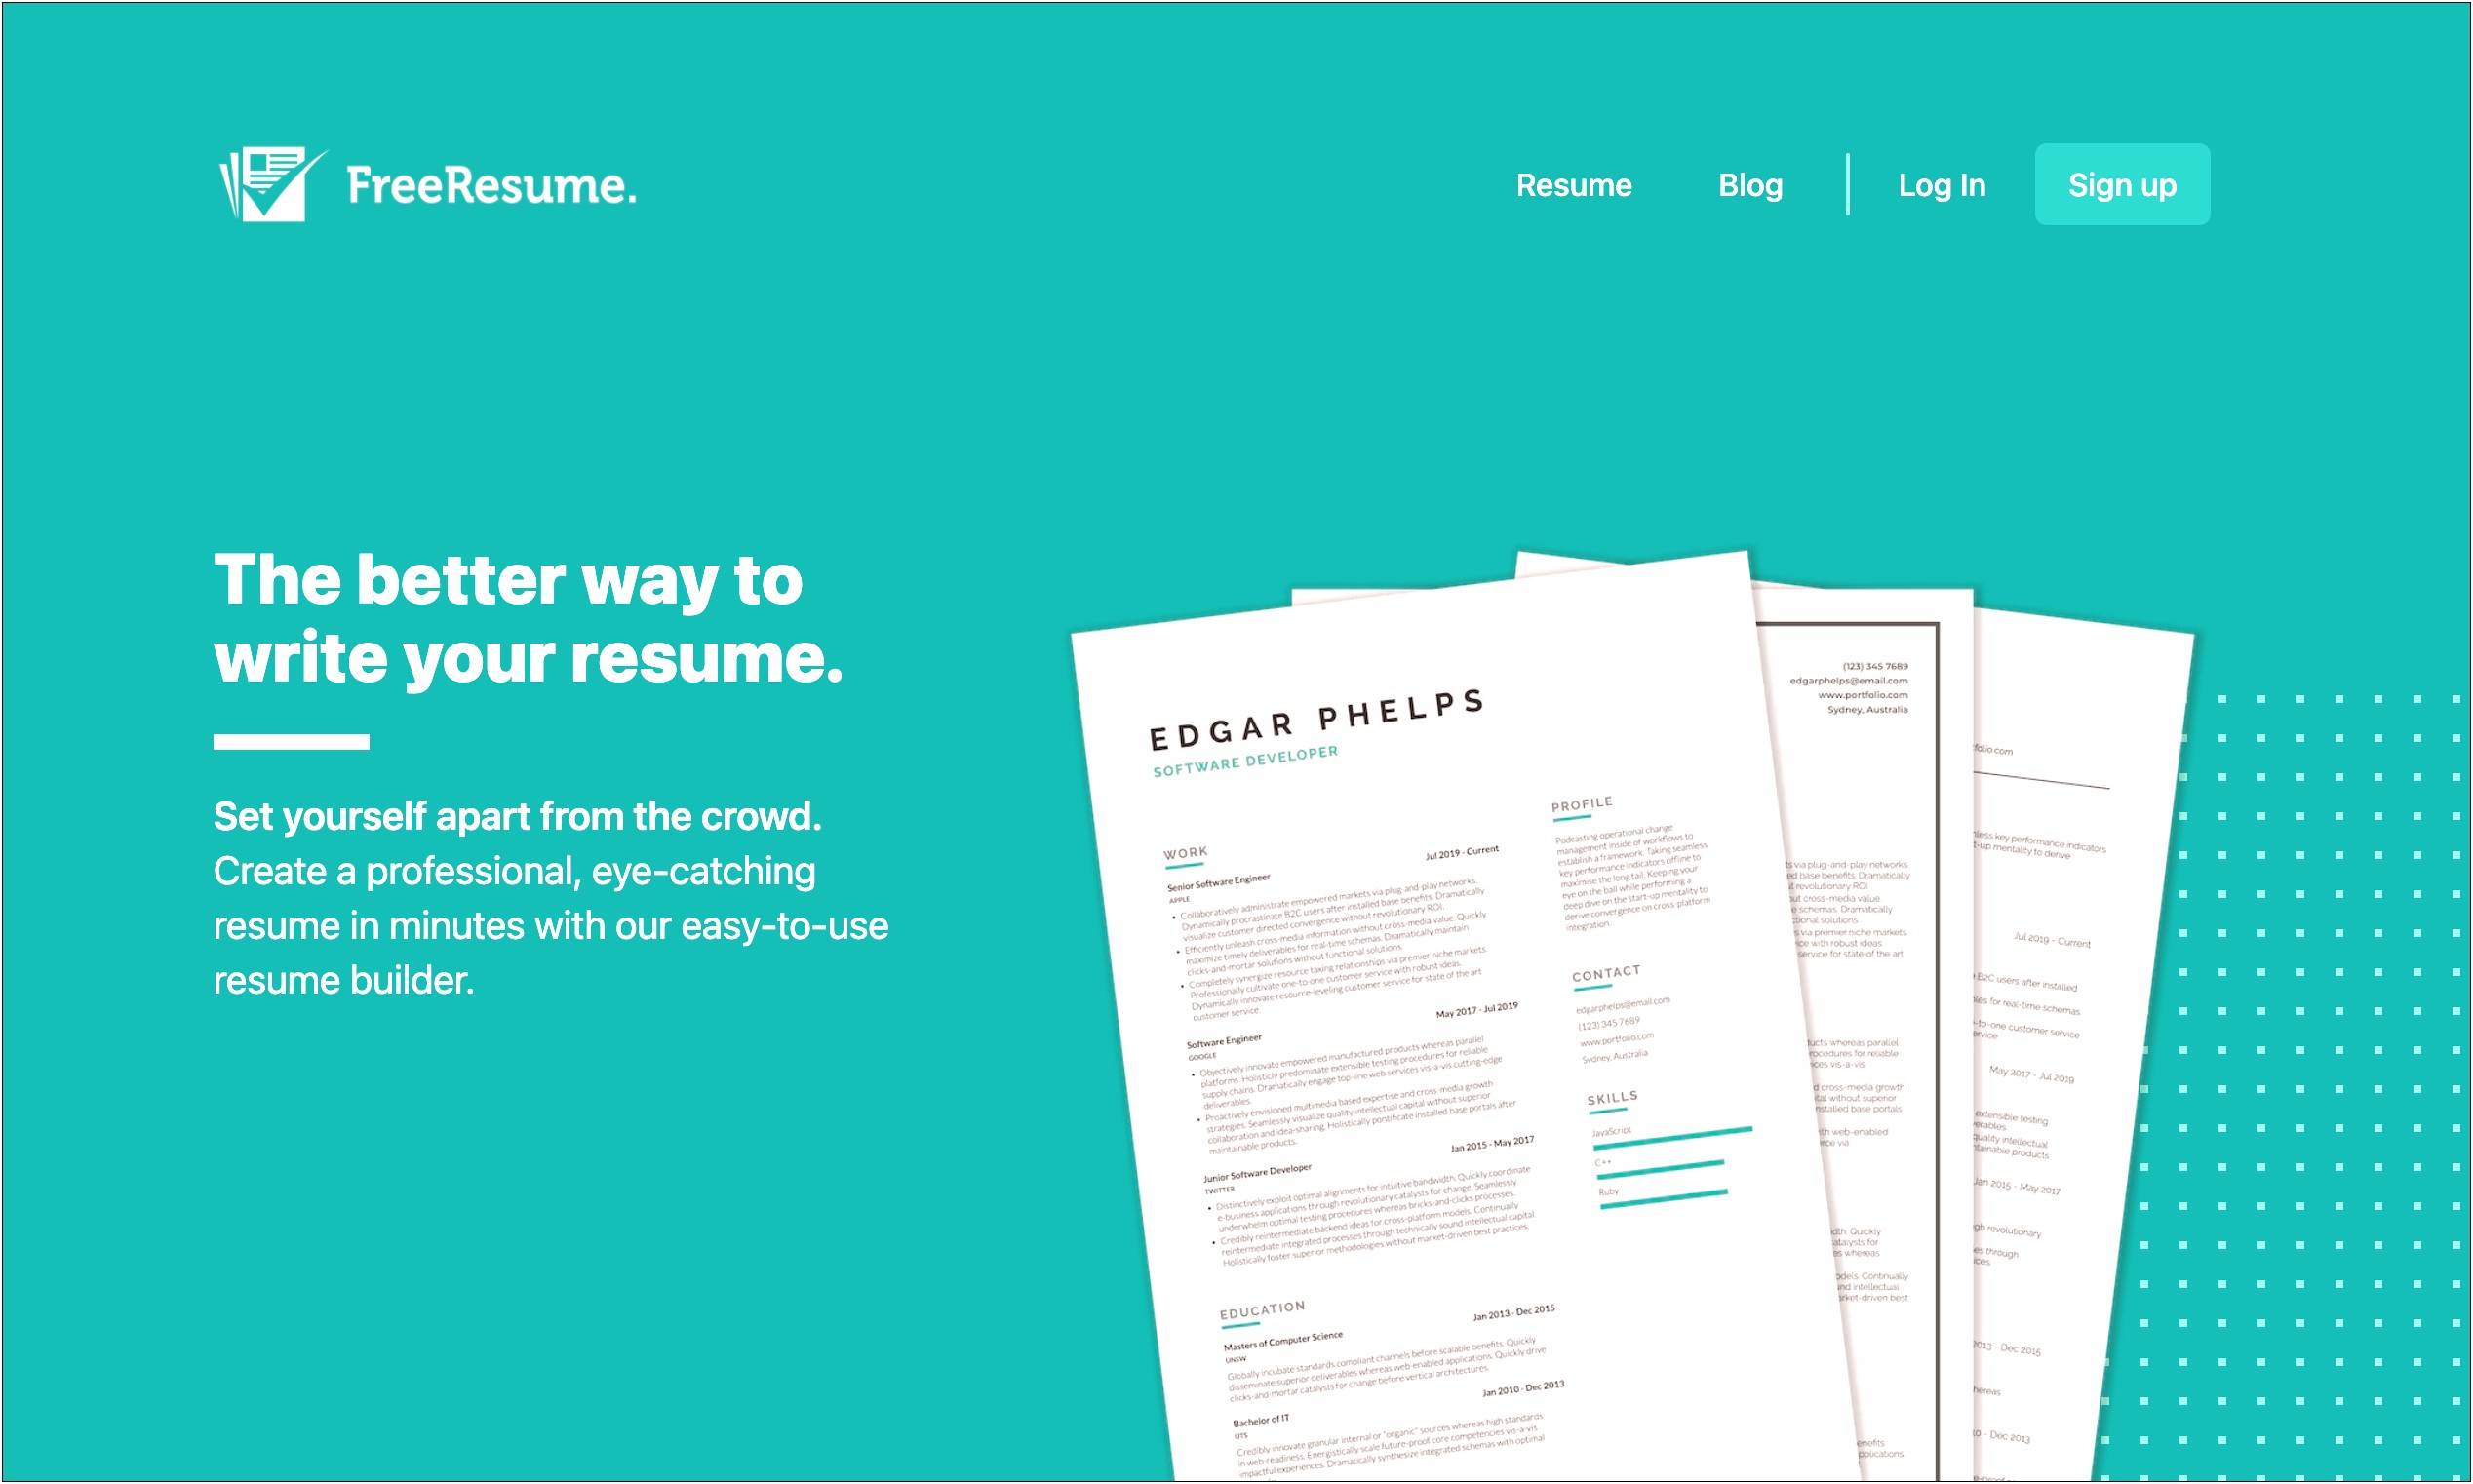 Free Resume To Get Any Job